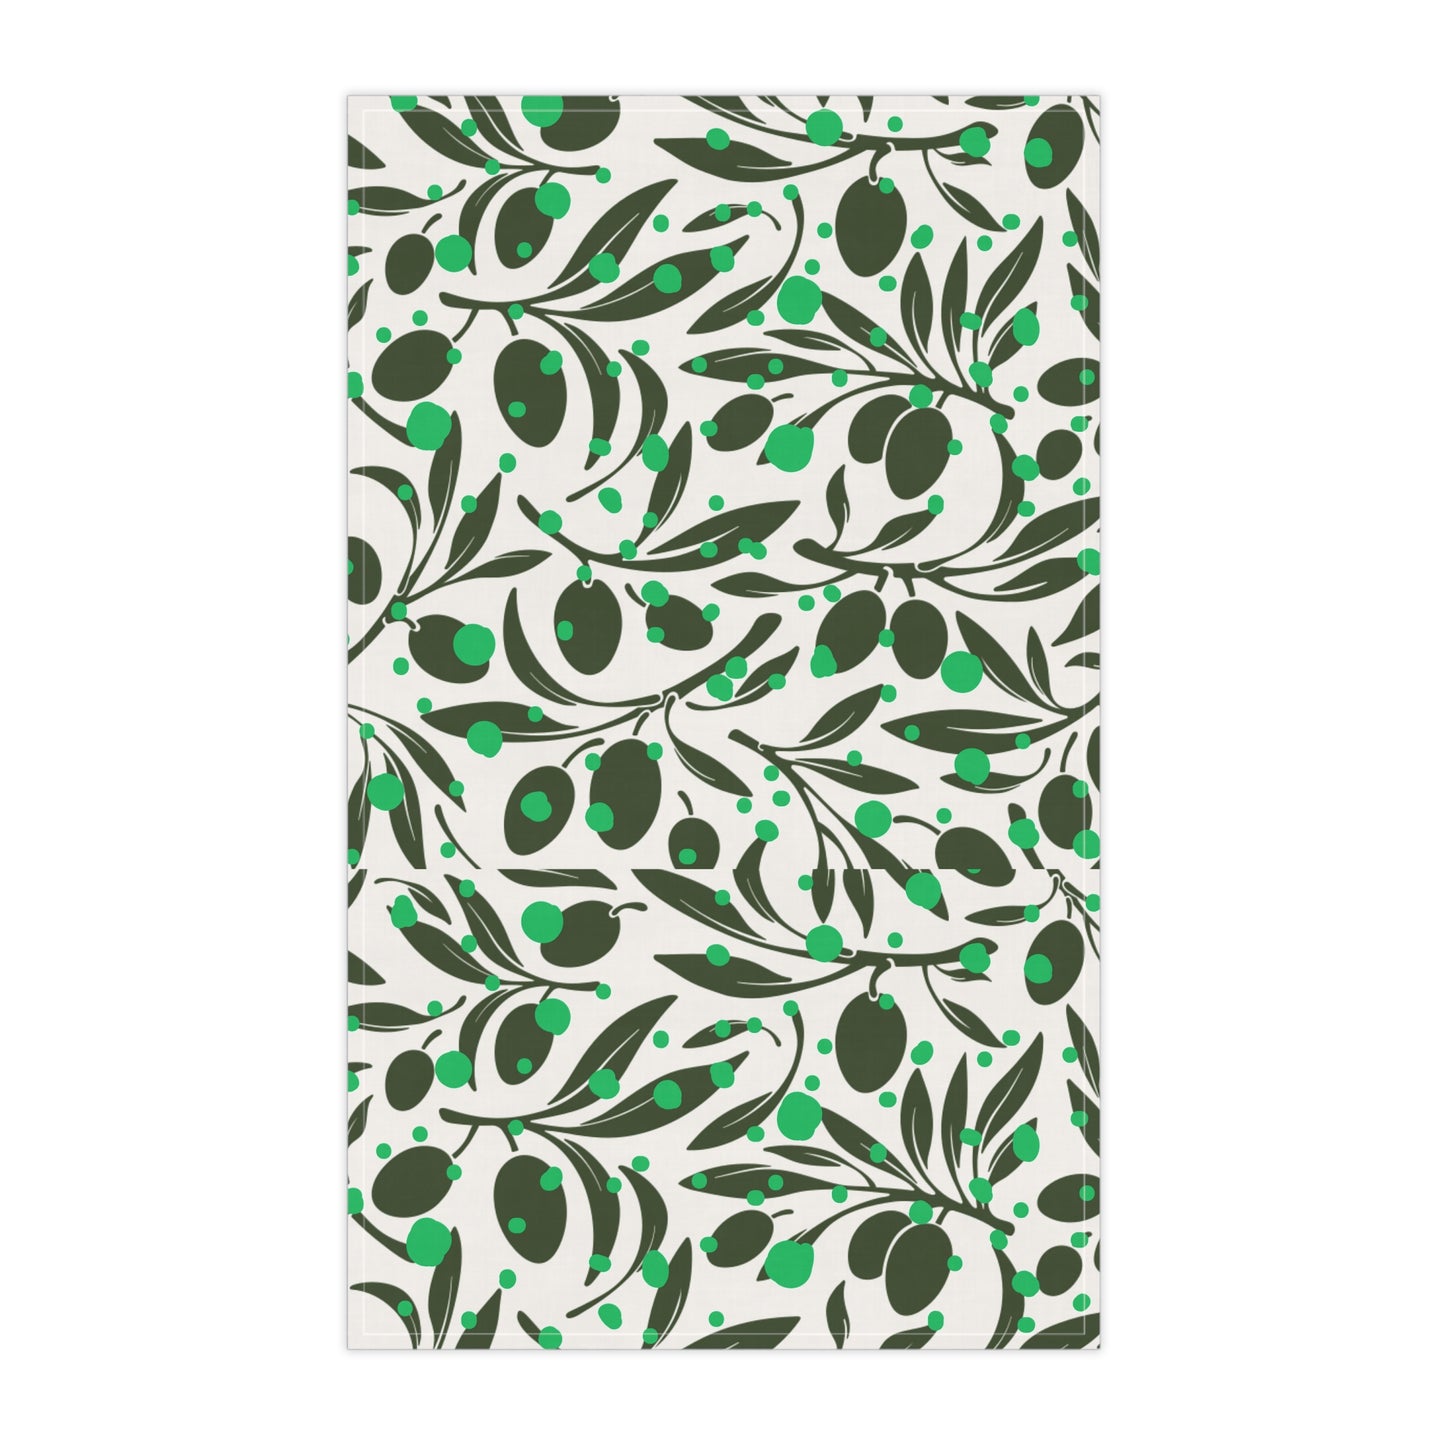 Olive Branches Midcentury Modern Black and Green Pattern Decorative Kitchen Tea Towel/Bar Towel